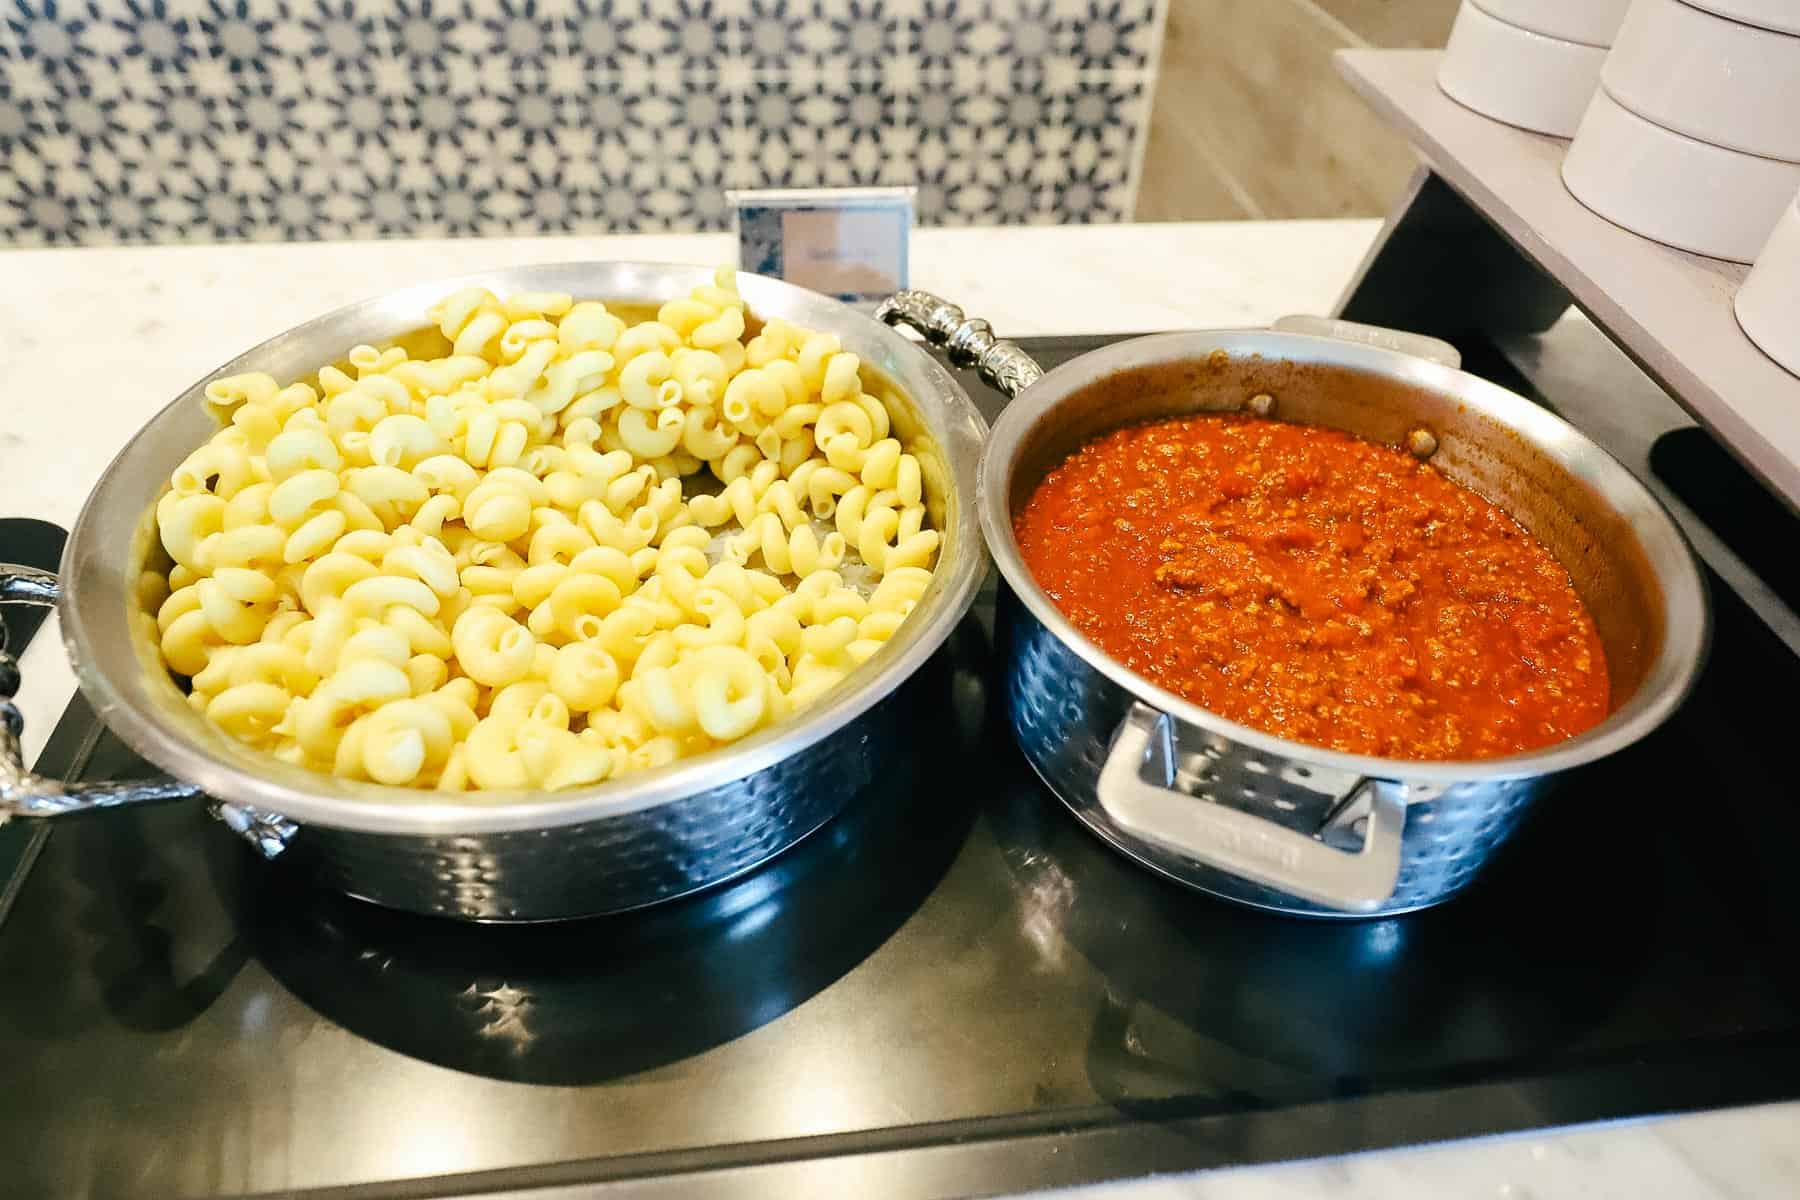 Pasta noodles and sauce 